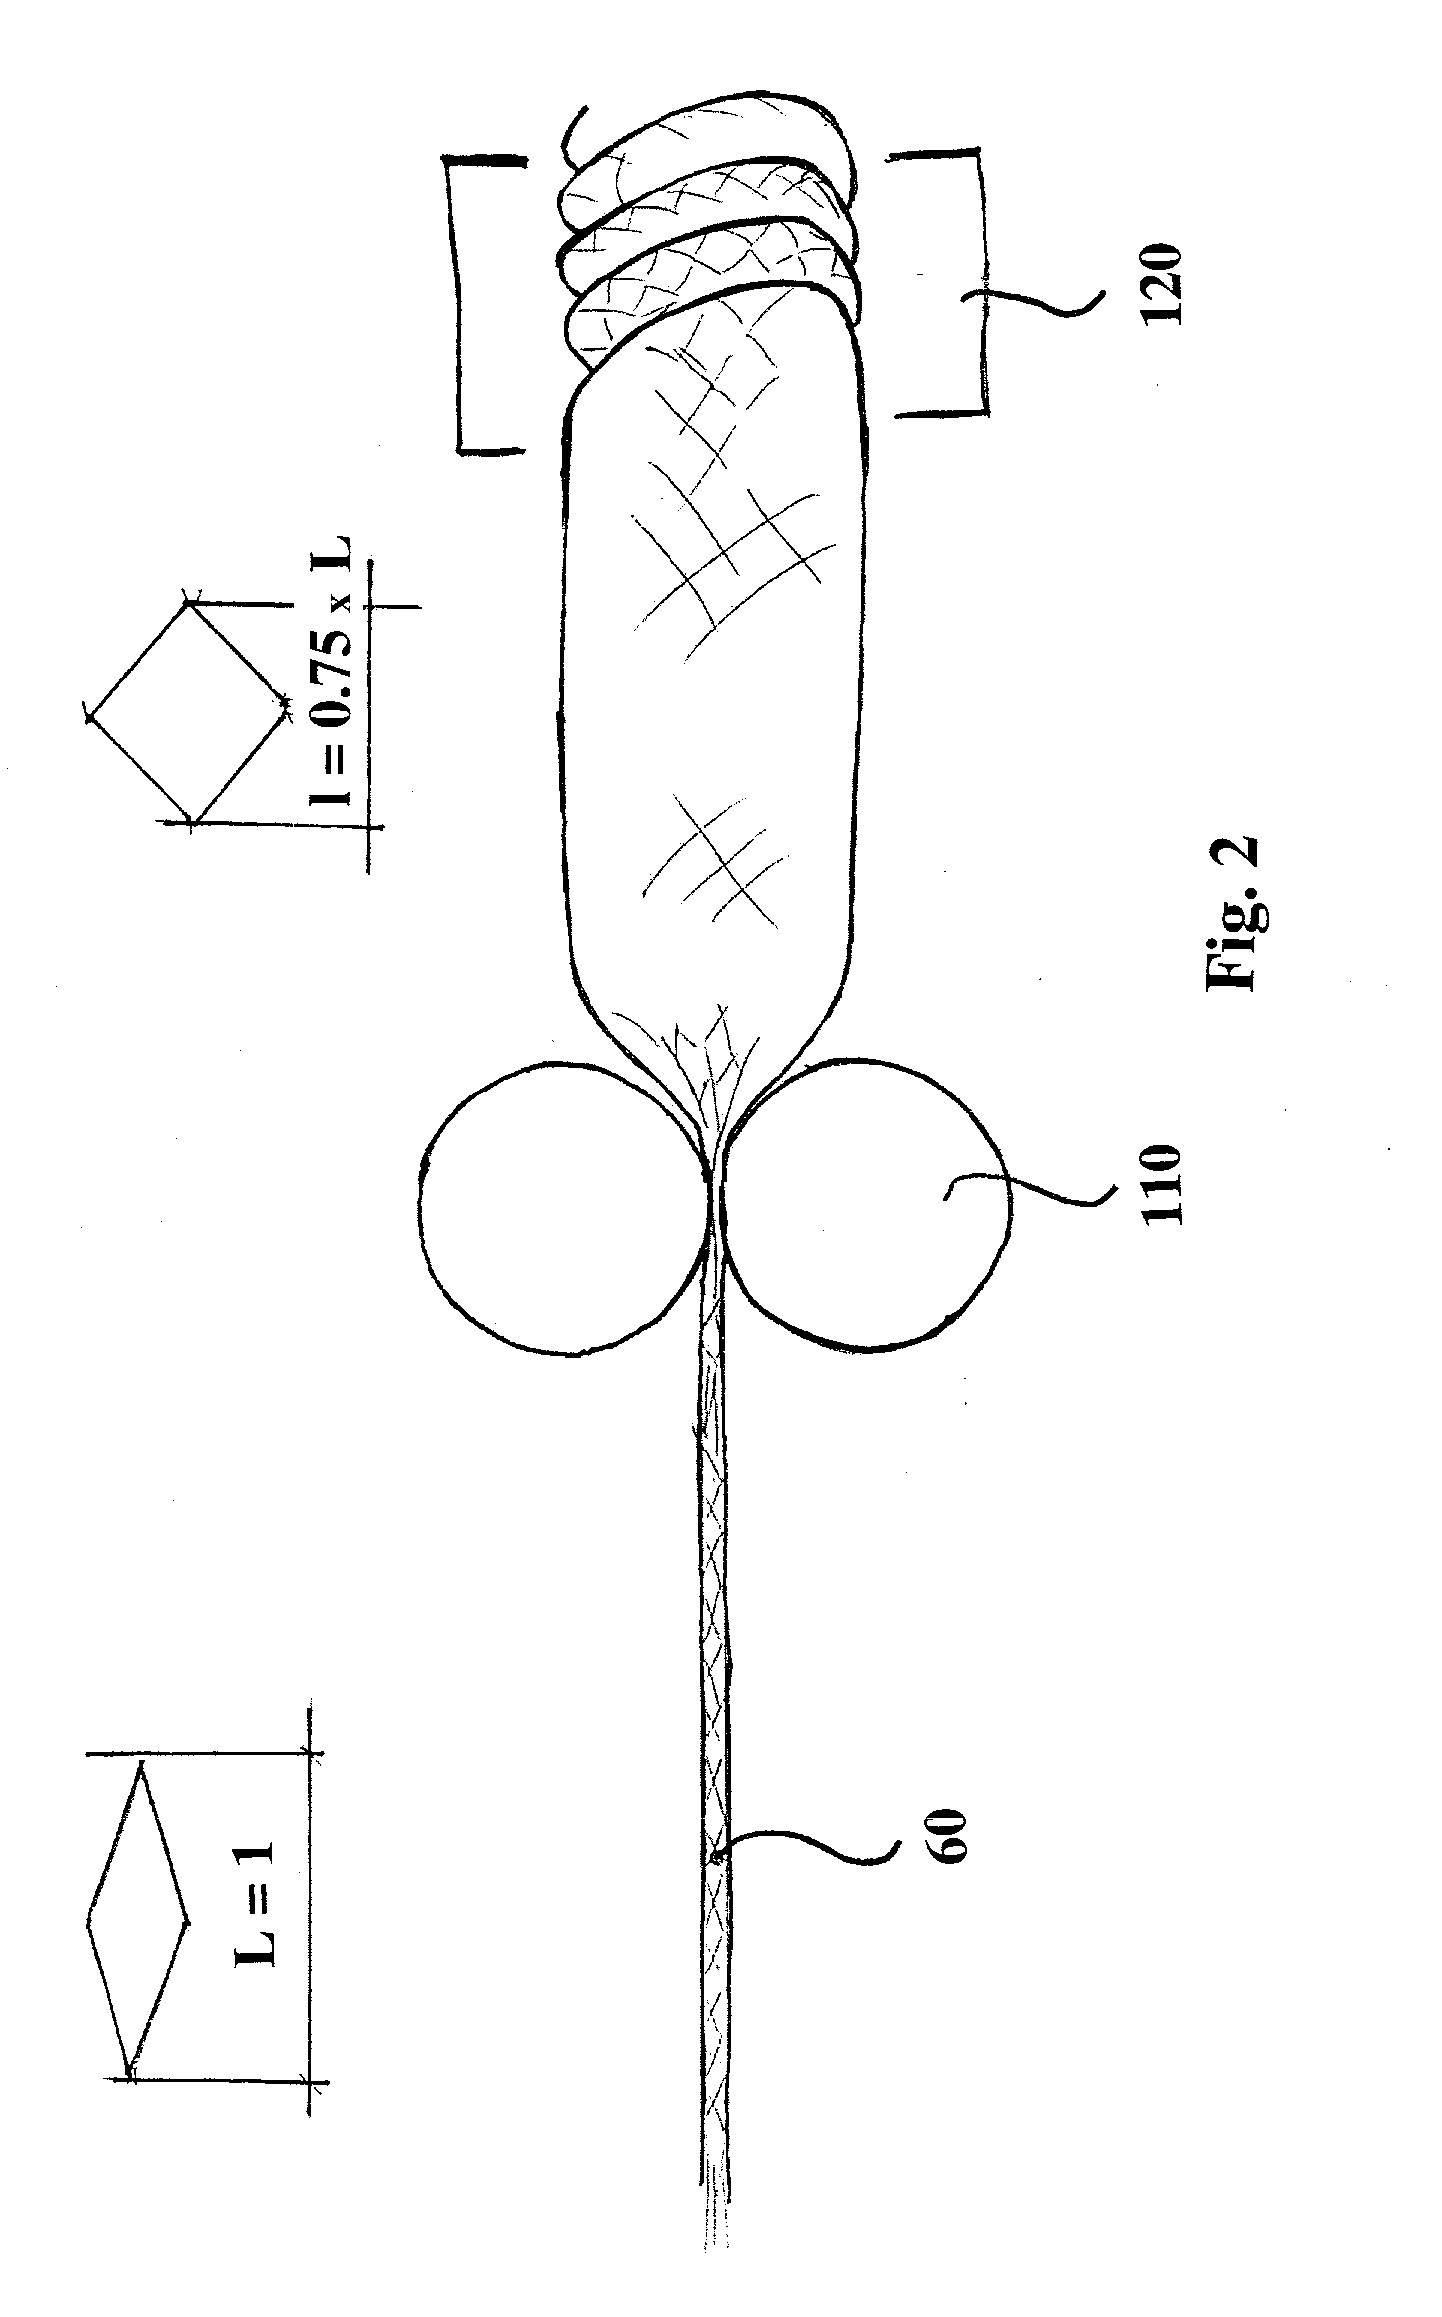 Method for Producing a Netted Casing